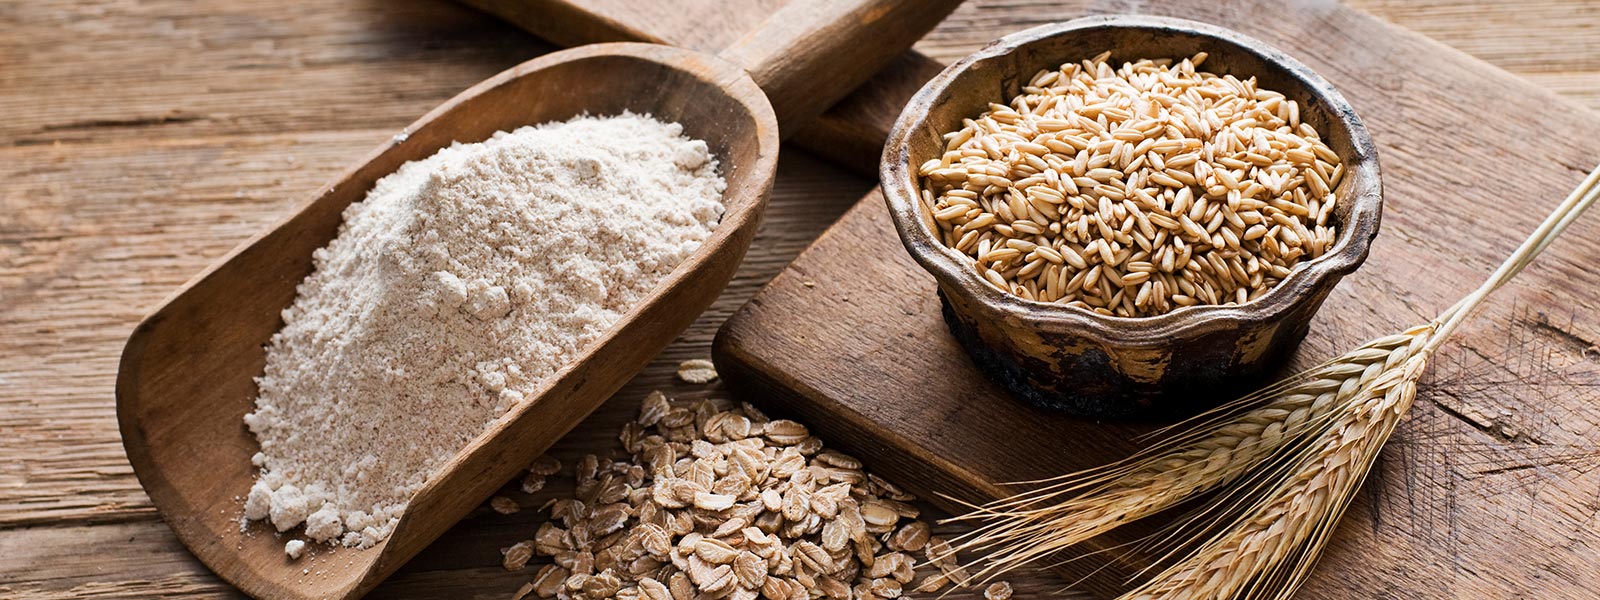 Organic and Natural Foods displayed on a wooden table with flour, grains, and oats